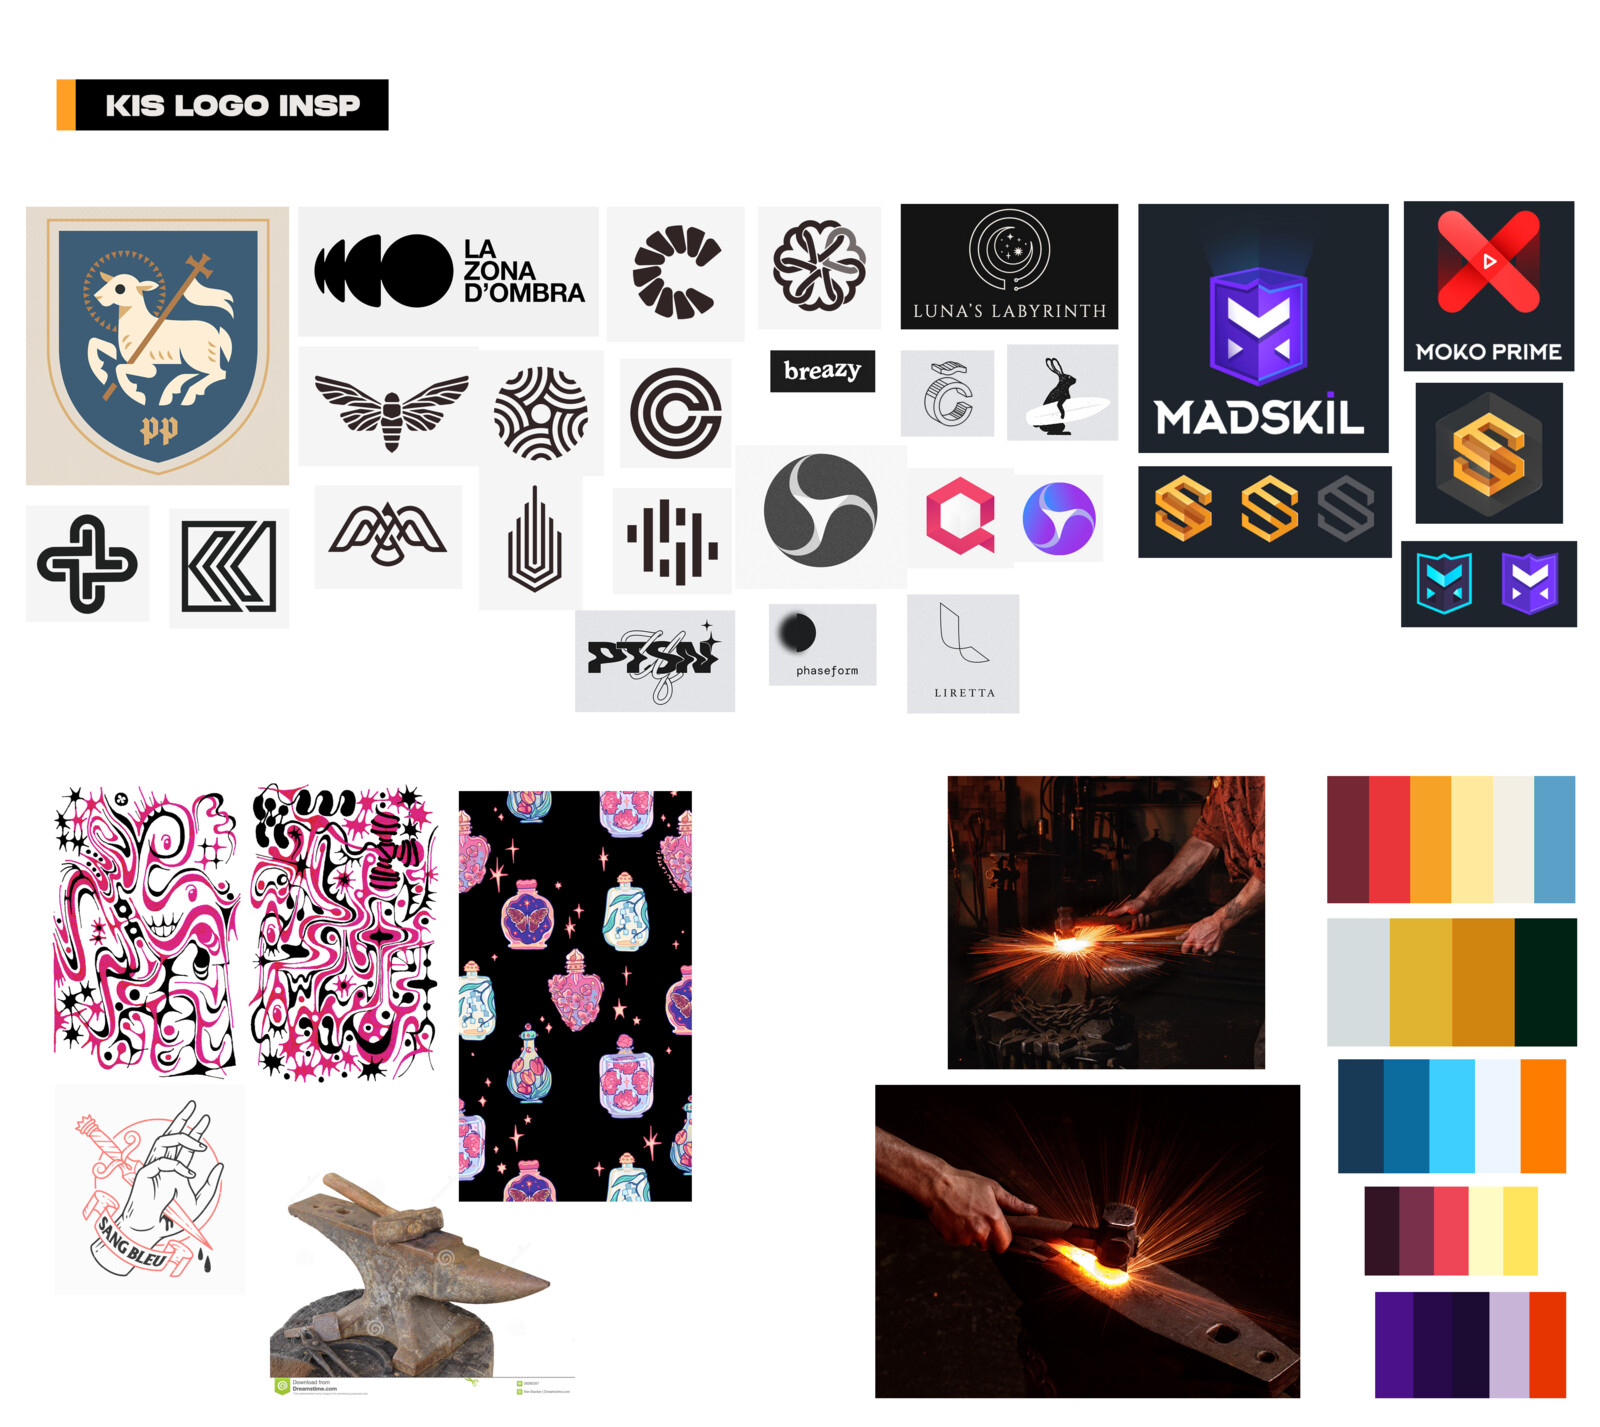 ID: Research done for inspiration; I took care to get inspiration for logos, vector work, feel, and photographic references. I also gathered a bunch of possible palettes.